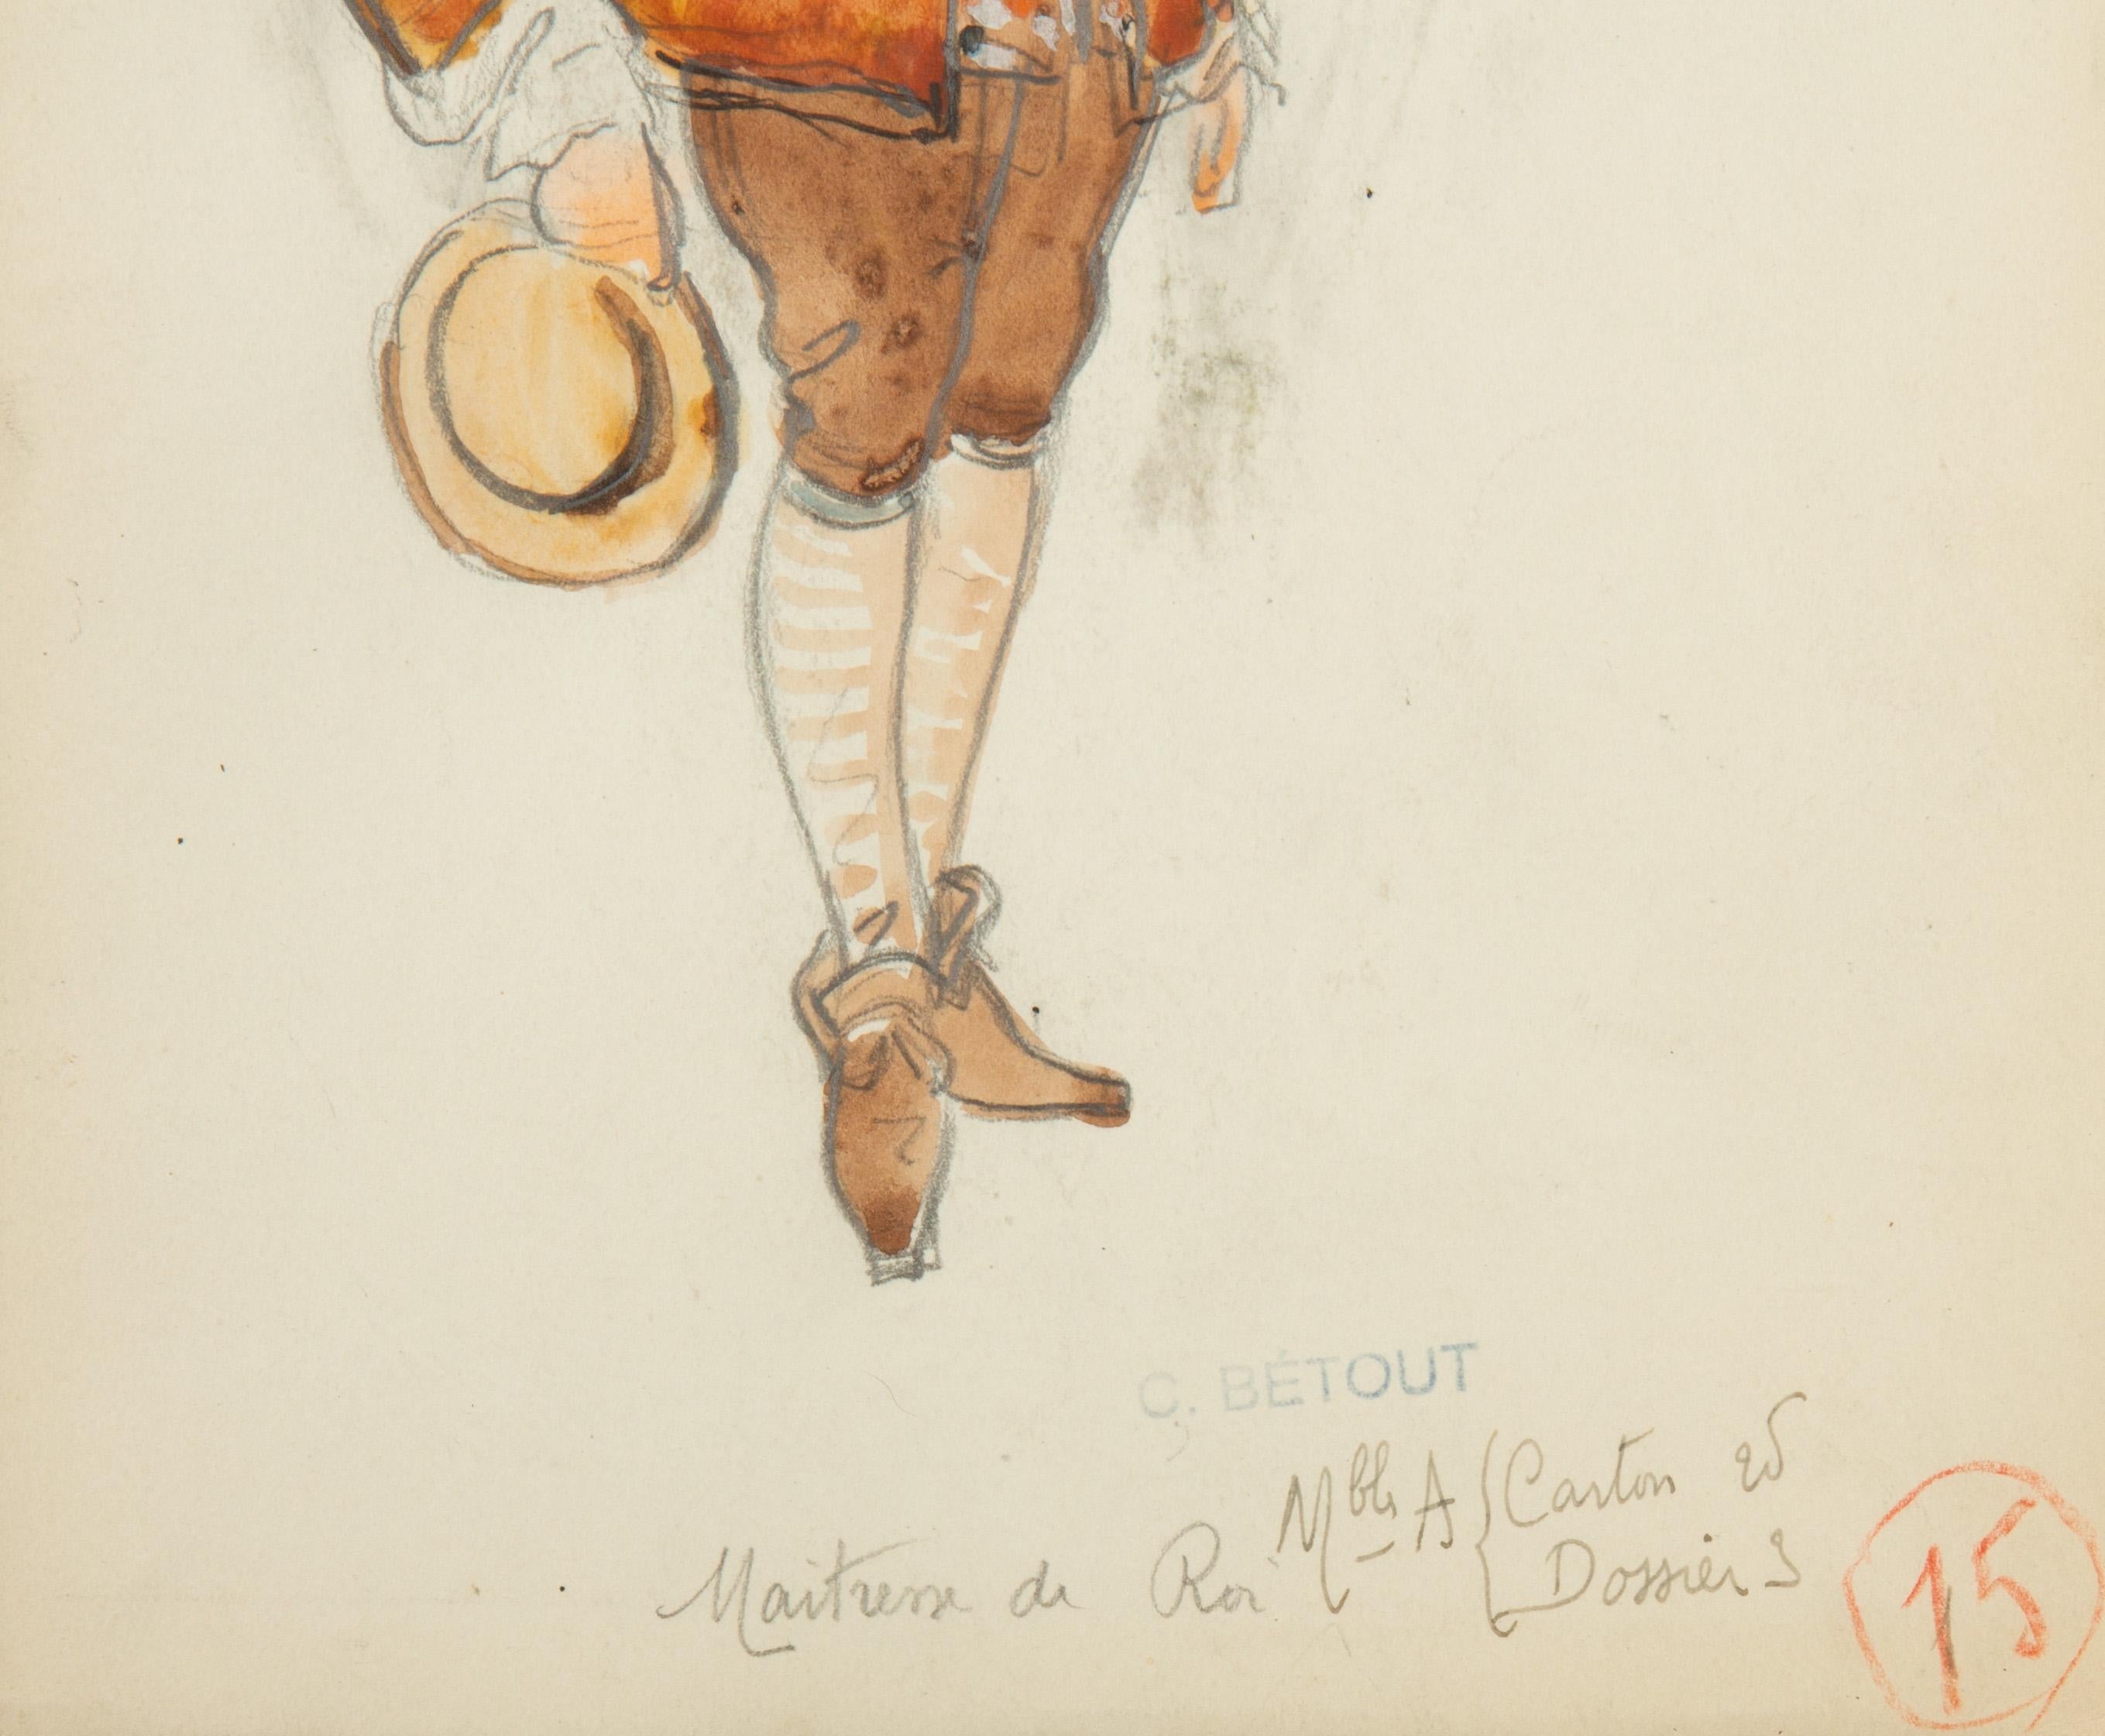 Framed Original Opera Costume Design Water Color, By Charles Betout In Good Condition For Sale In New York, NY